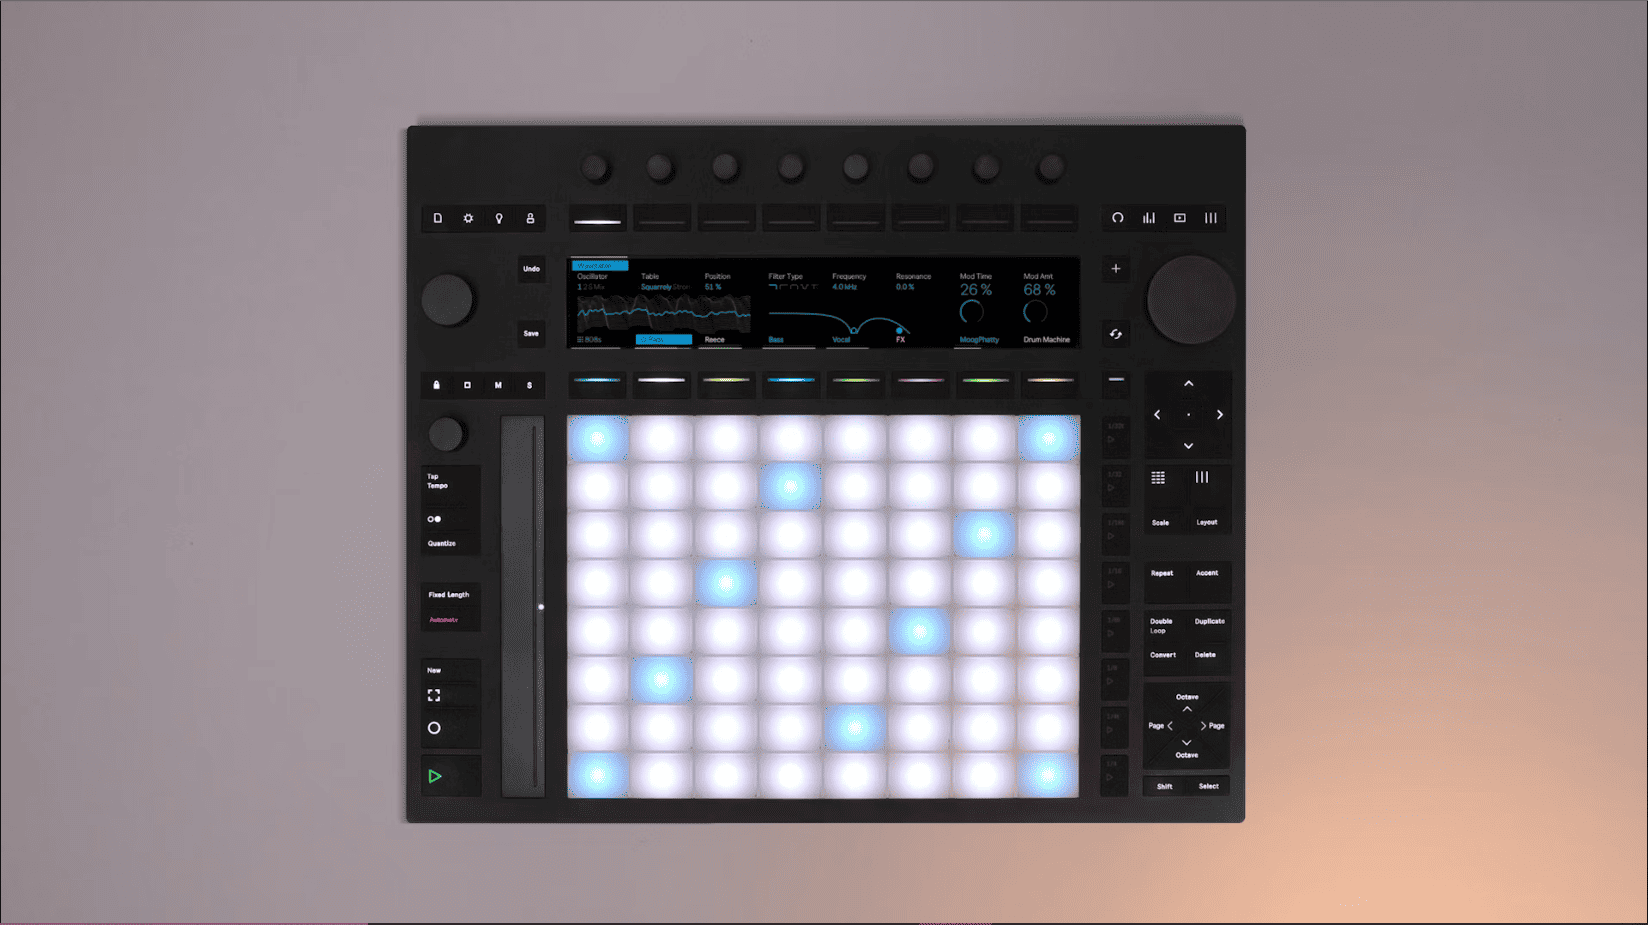 ableton push 3 interface top view